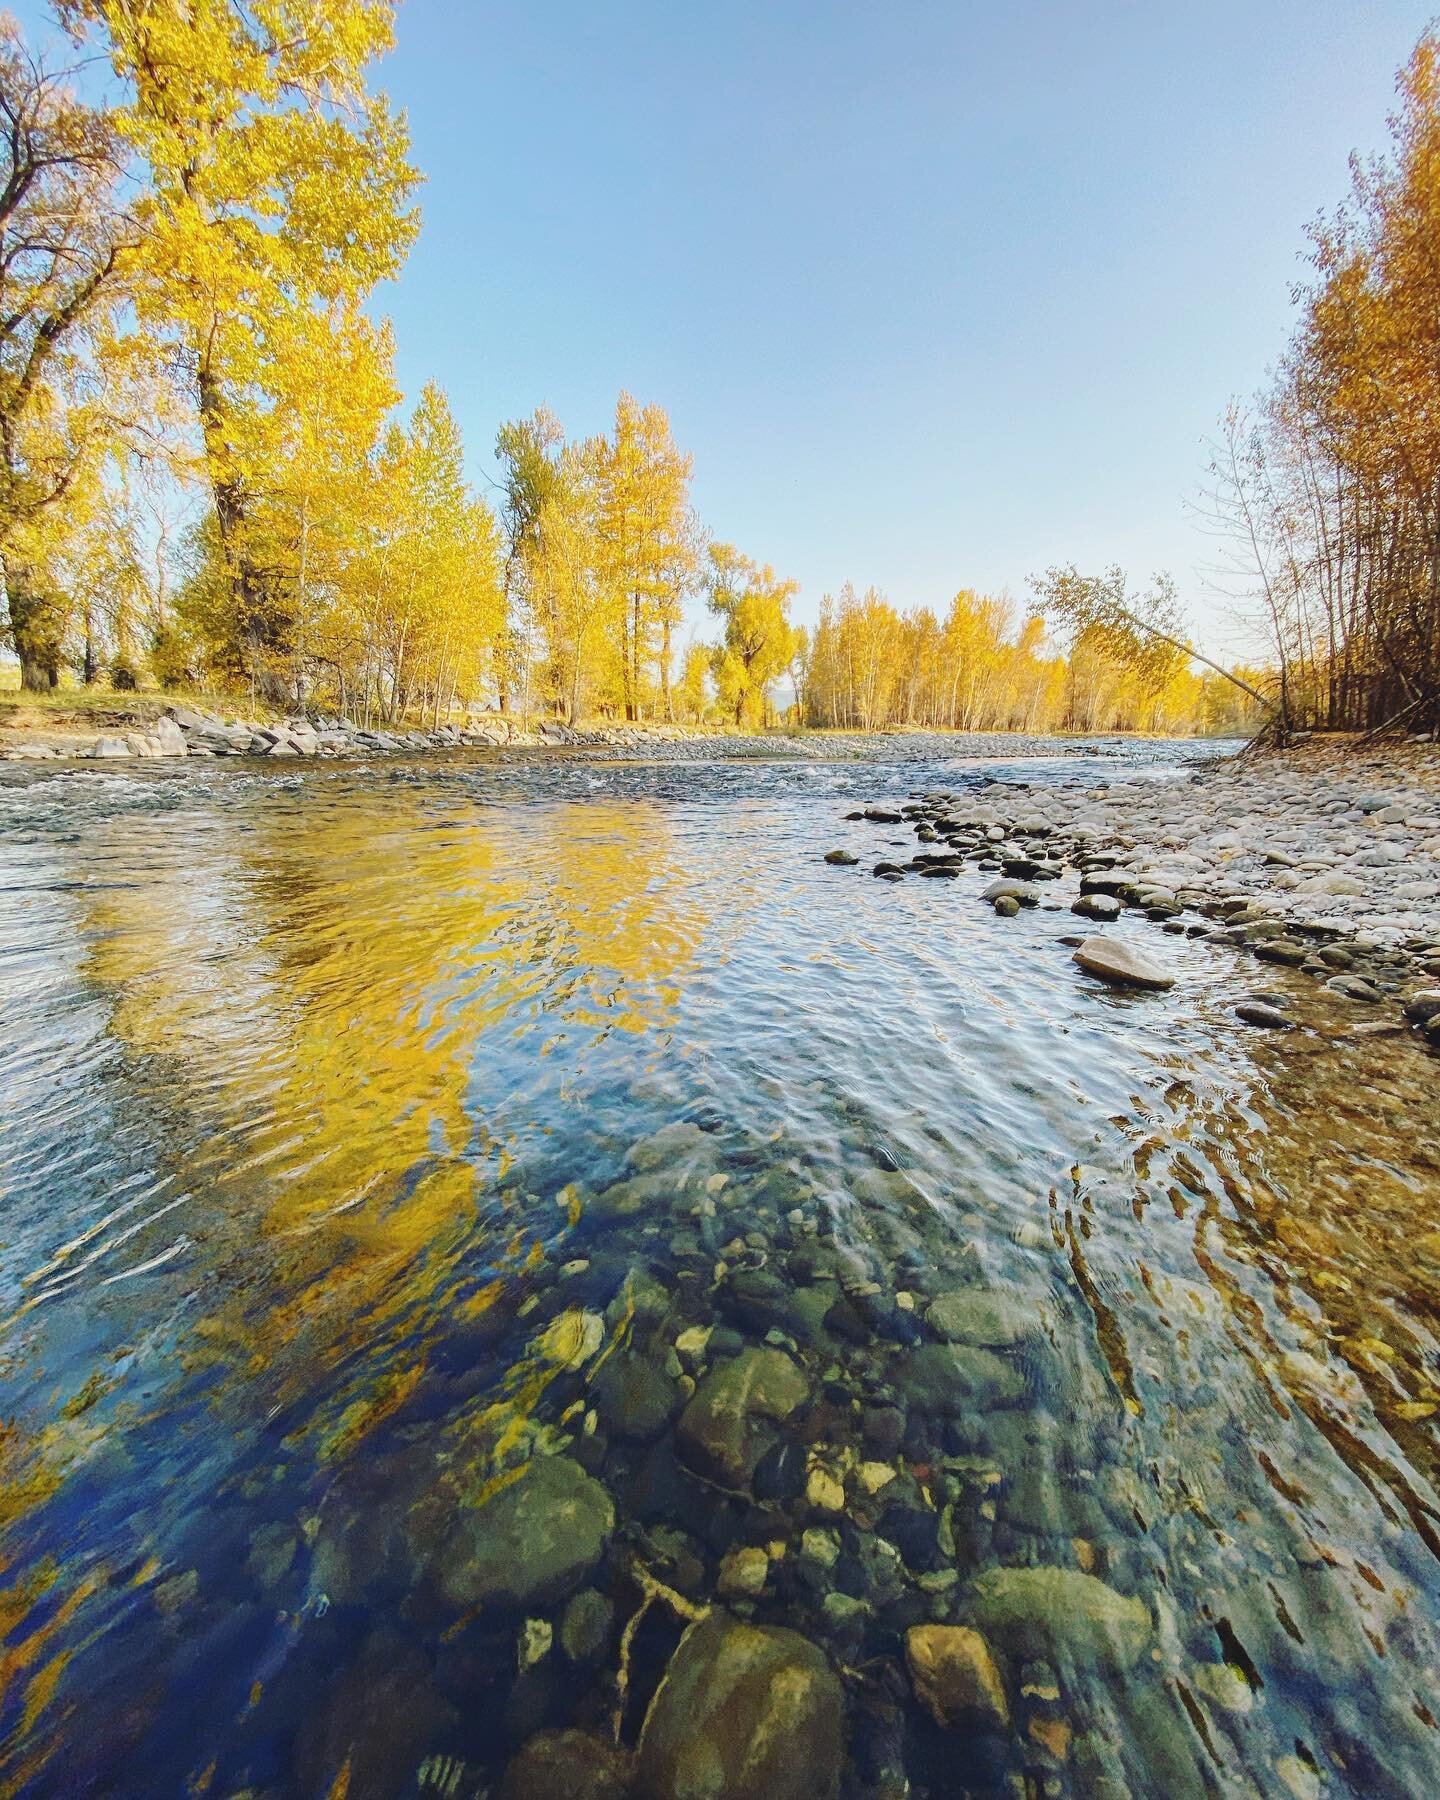 &bull;Cottonwood continues modern-day David versus Goliath battle to protect the fabled Gallatin River&bull;
&bull;
Last week, Cottonwood Environmental, Montana Rivers, and the Gallatin Wildlife Association filed a motion asking the federal court to 